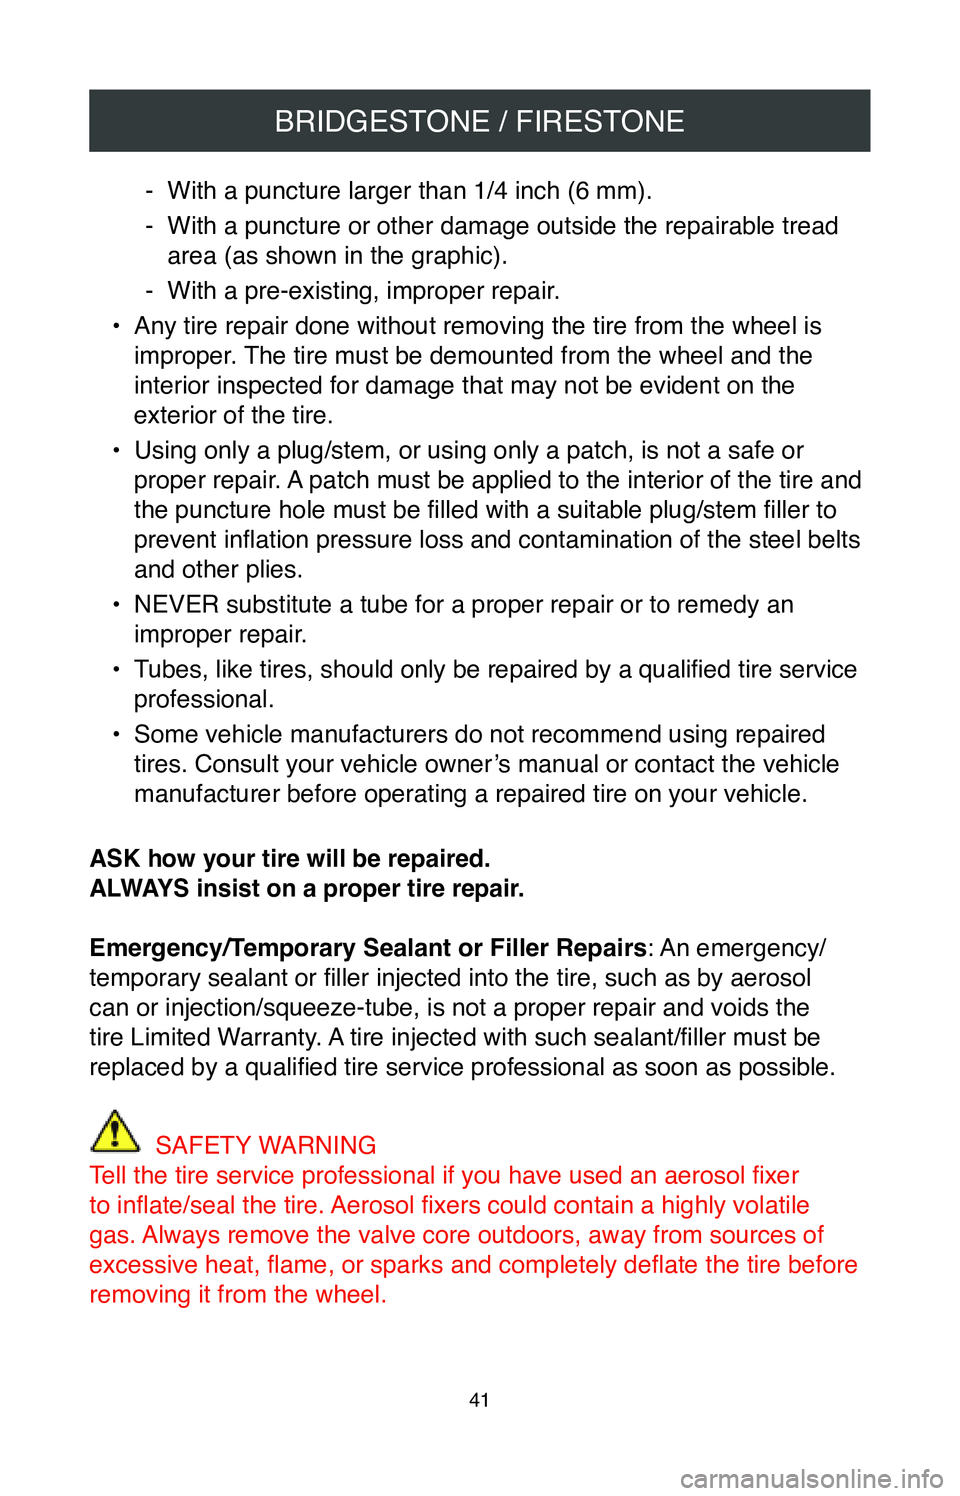 TOYOTA YARIS 2020  Warranties & Maintenance Guides (in English) BRIDGESTONE / FIRESTONE
41
 - With a puncture larger than 1/4 inch (6 mm).
 -With a puncture or other damage outside the repairable tread 
area (as shown in the graphic).
 - With a pre-existing, impro